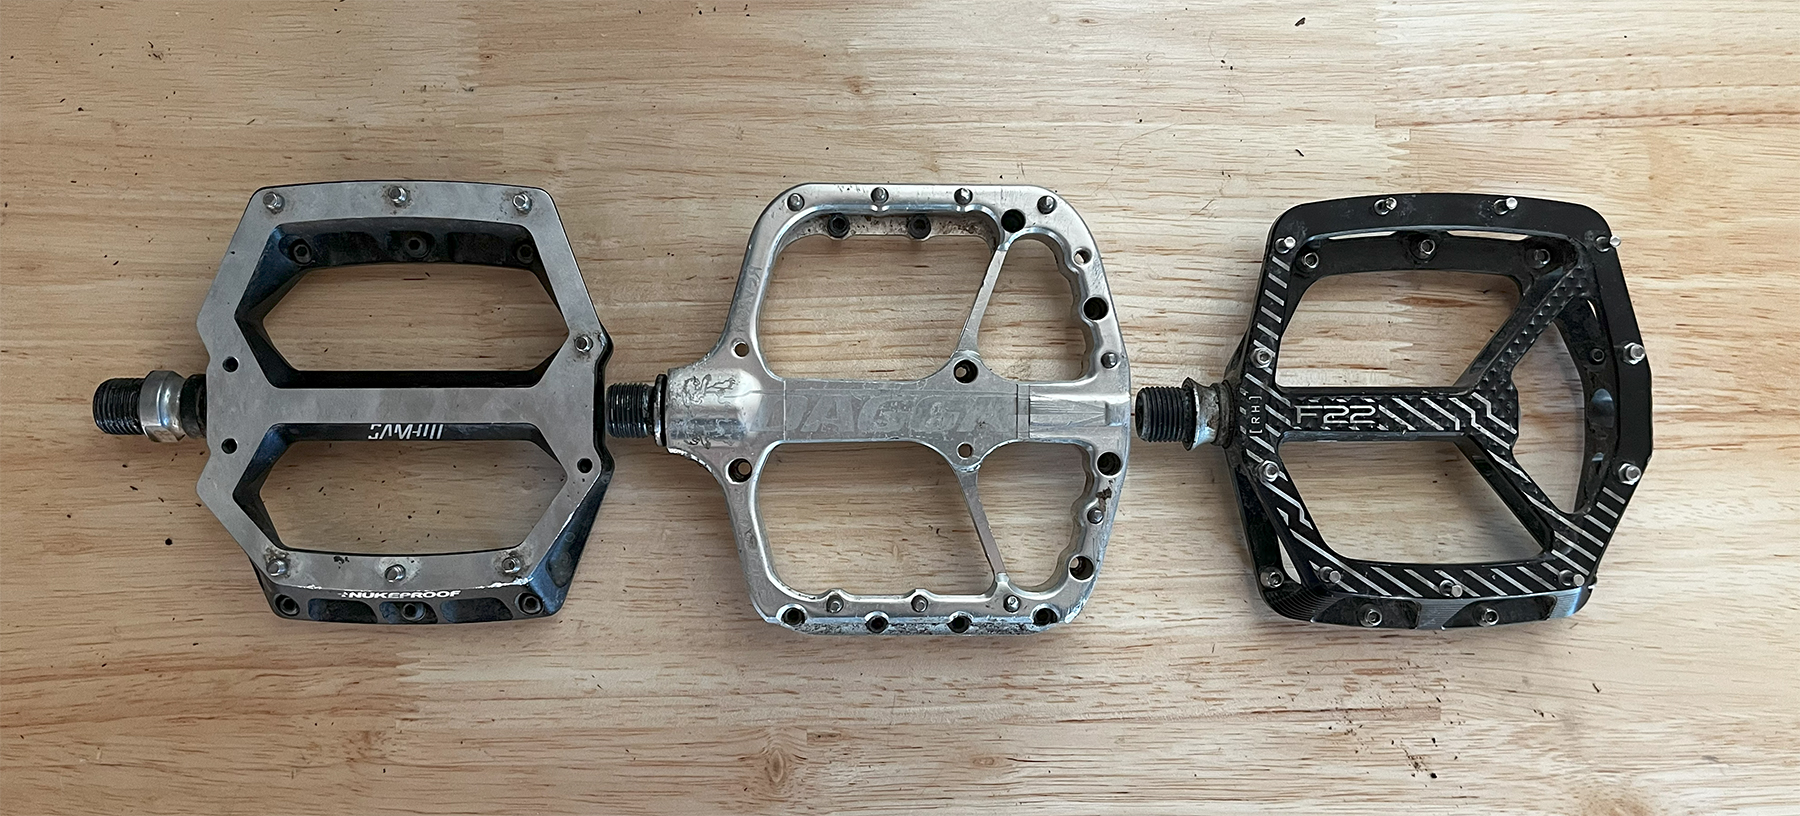 Zack Henderson reviews the F22 Flat Pedals for Blister